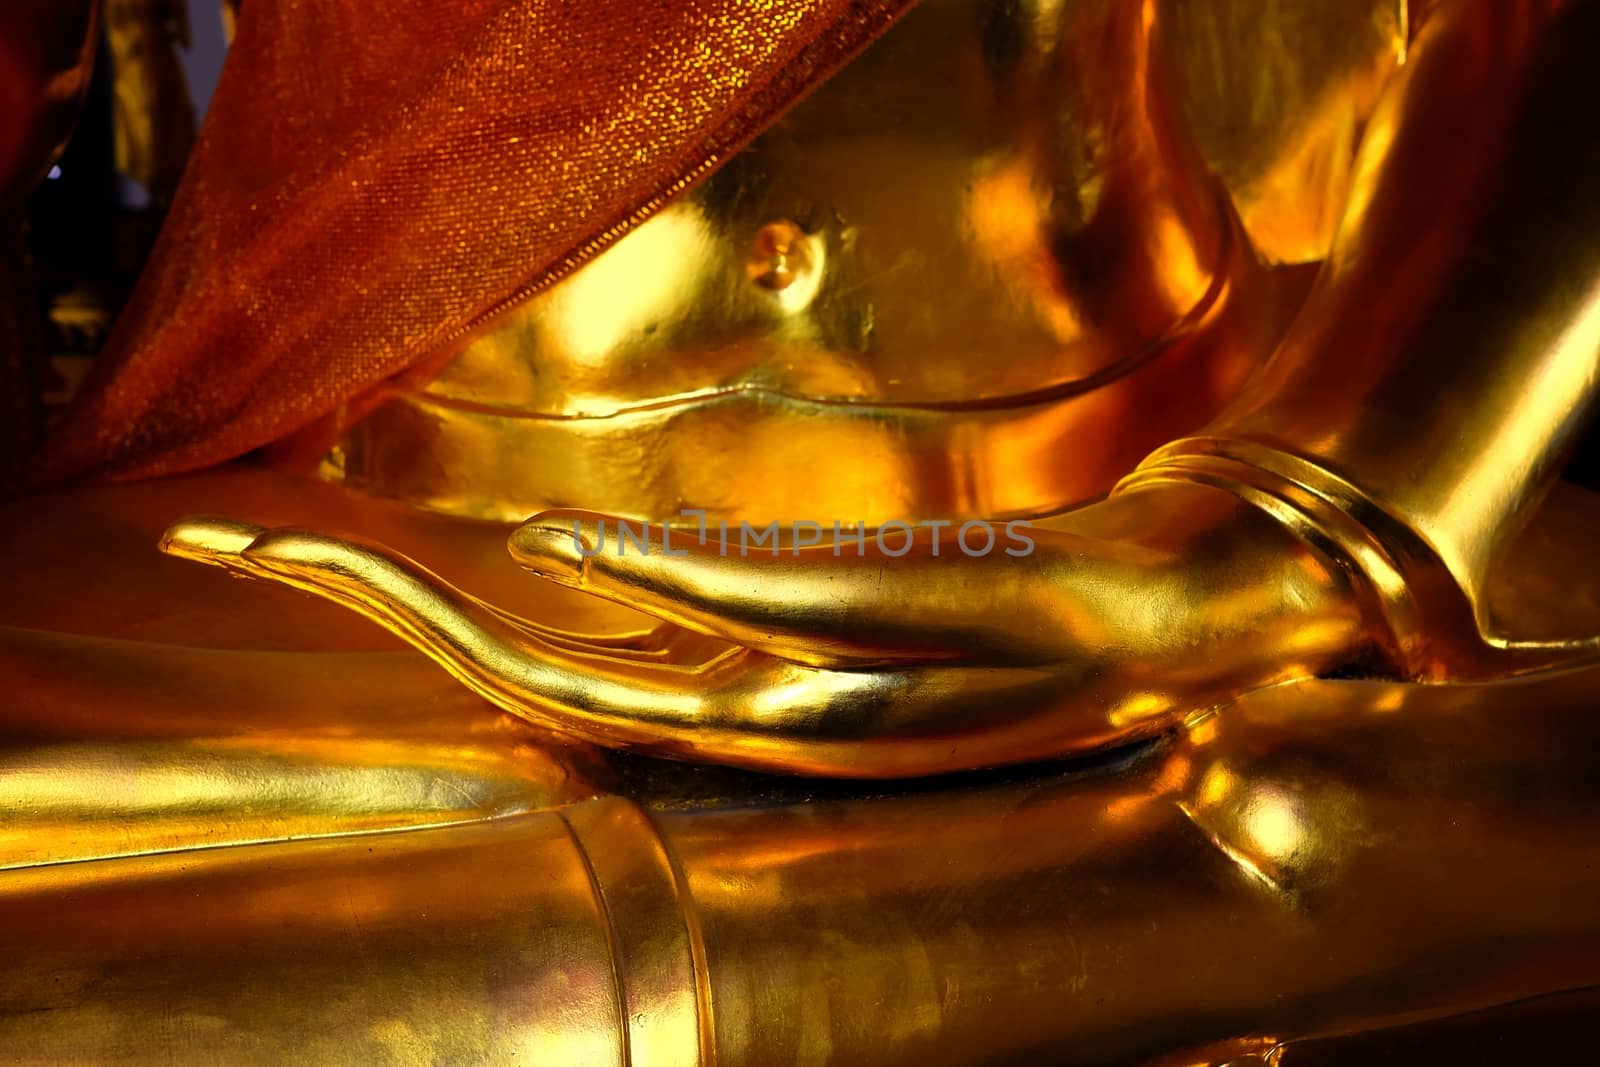 Closed-up Golden Hand of Ancient Buddha Image. by mesamong